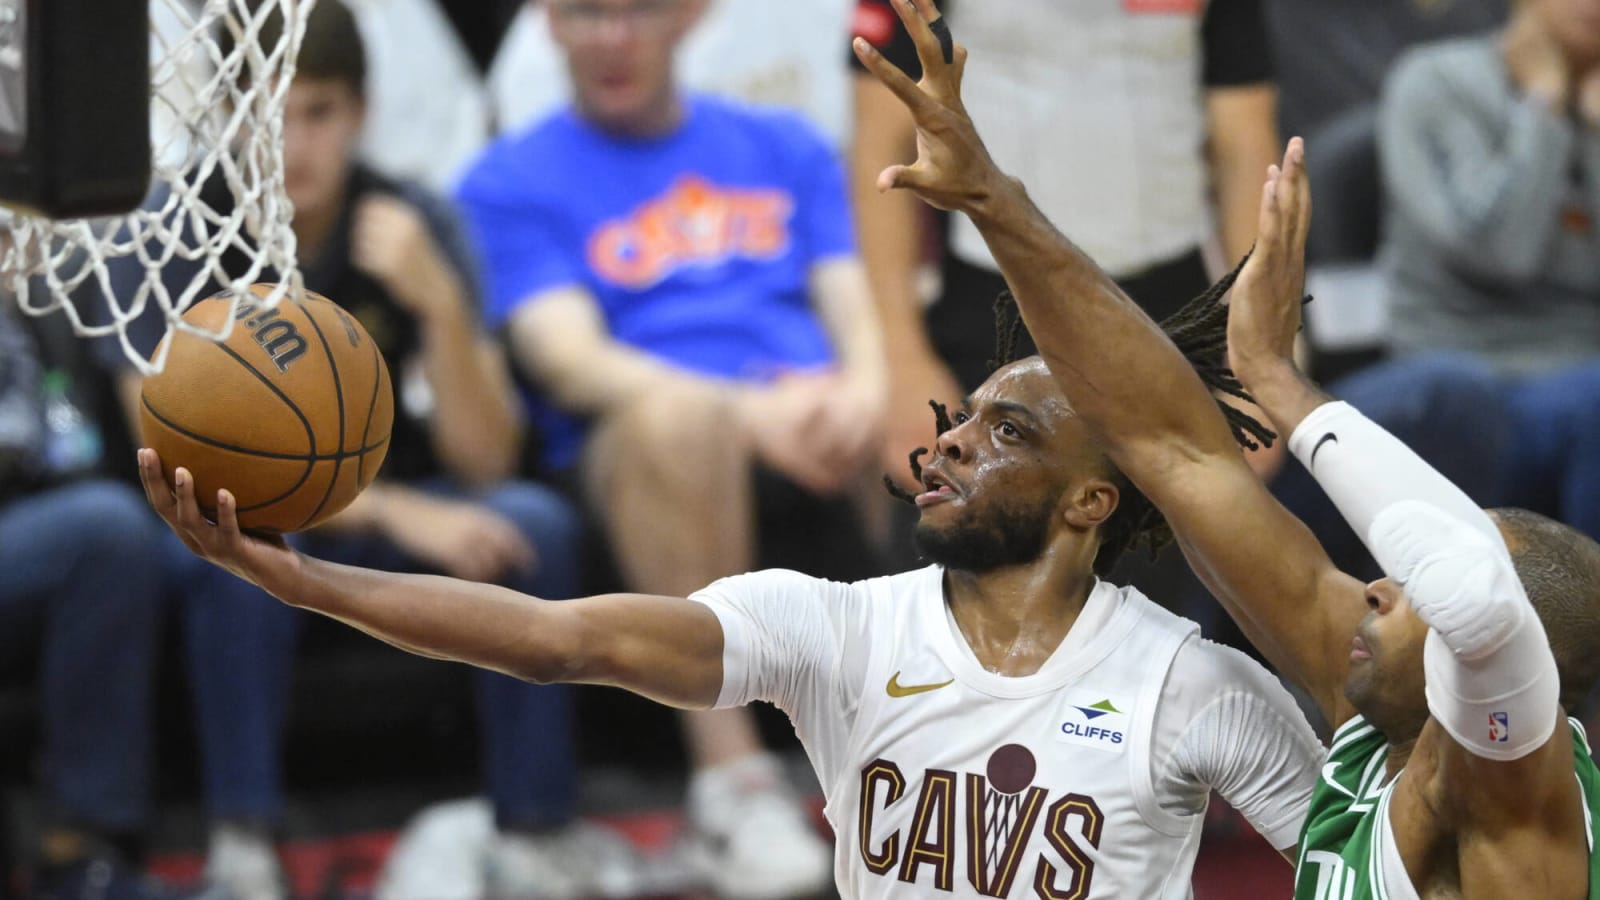  Undermanned Cavs Give Admirable Effort, But It’ll Take An NBA Miracle Now